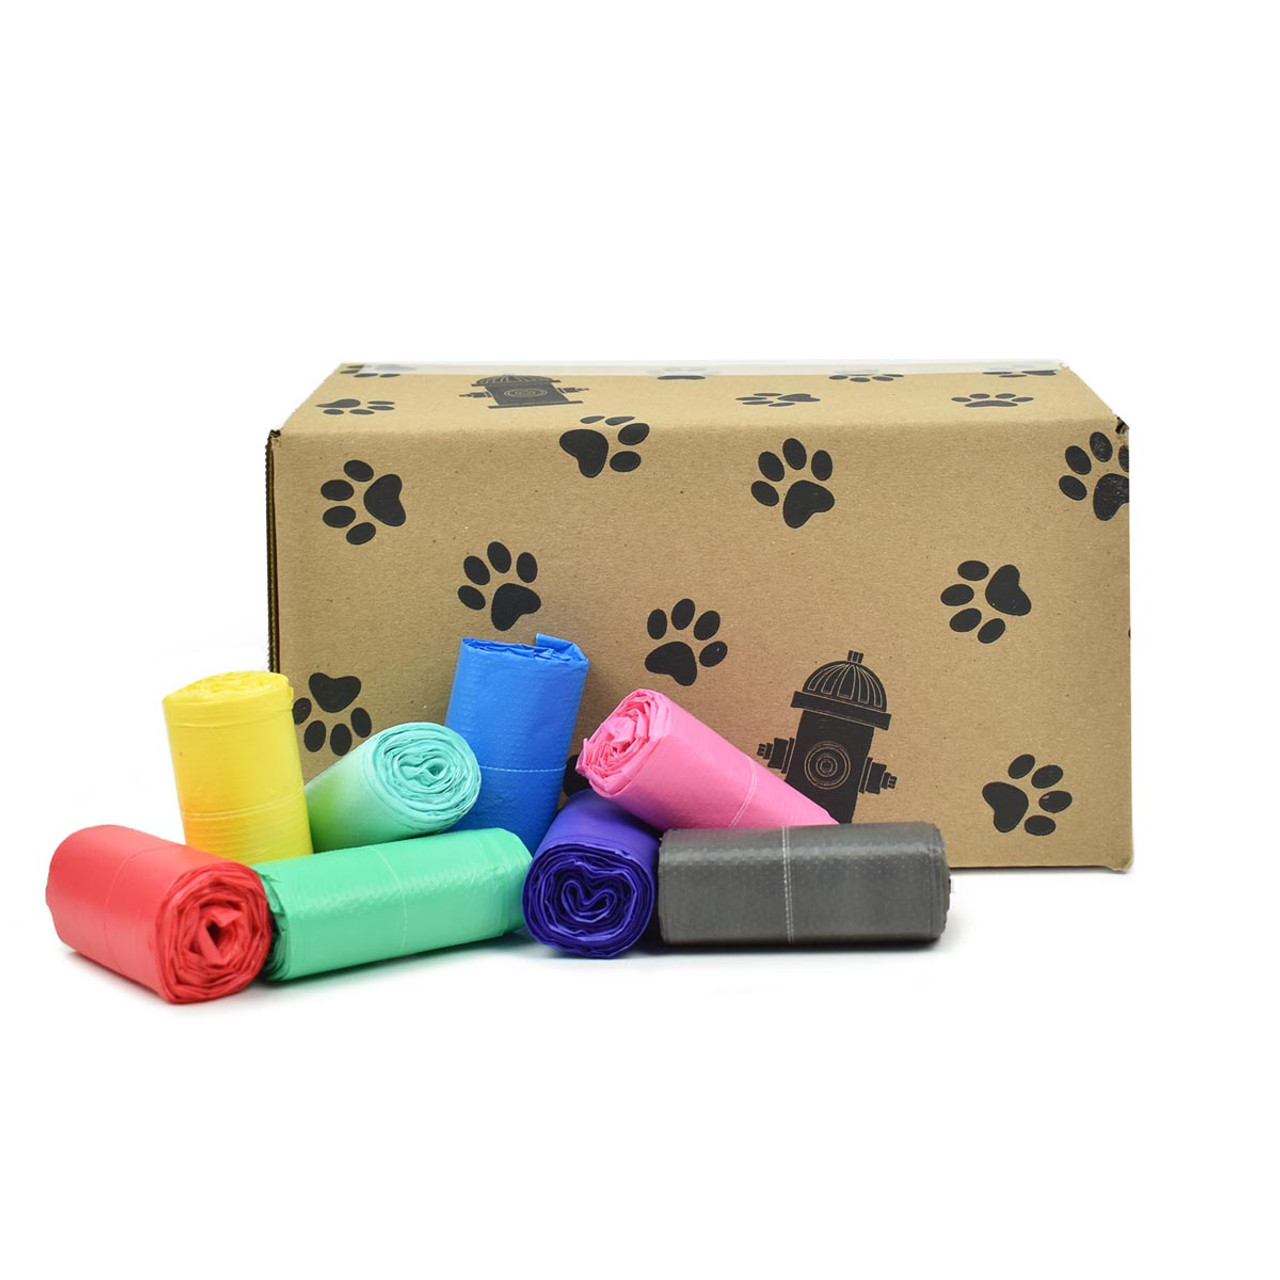 Post-Consumer Recycled Plastic Dog Poop Bags | Only Natural Pet